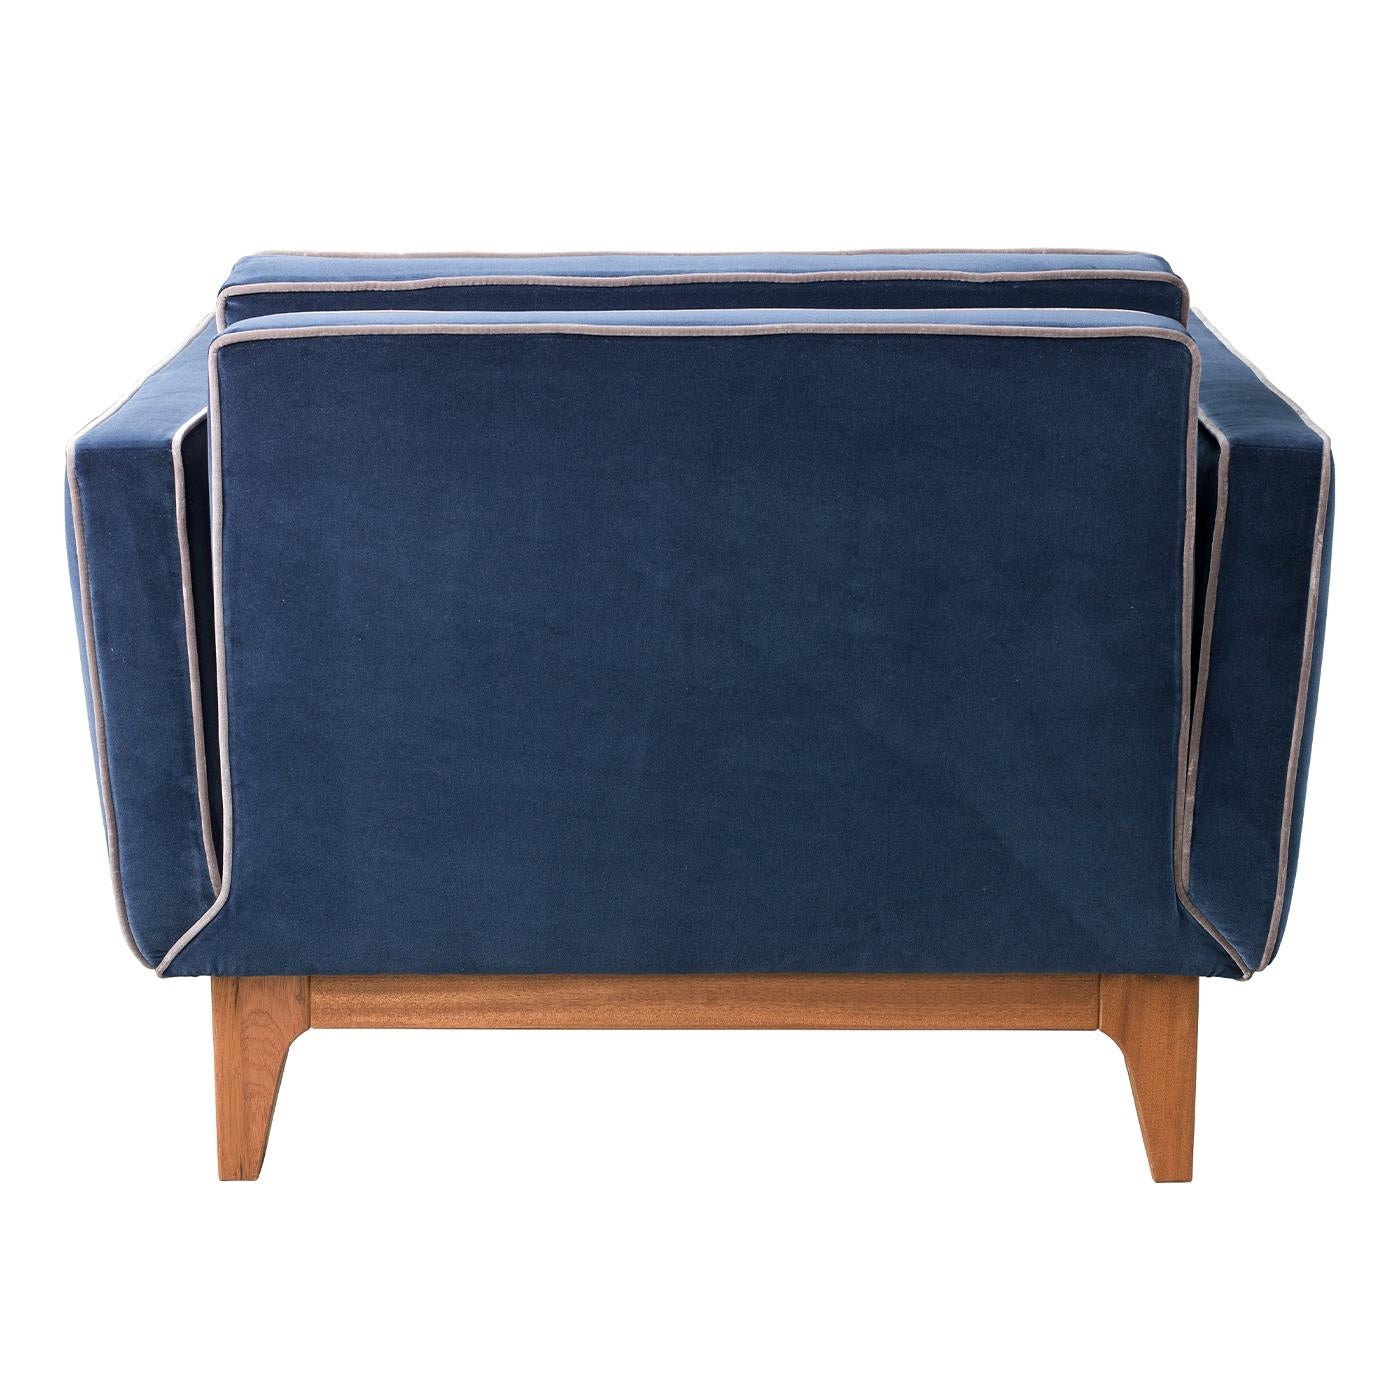 The Yvan Armchair combines mid-century influences with modern aesthetics, boasting a solid mahogany base with a rich brown tone. Its deep blue velvet upholstery is enhanced with contrast trims and classic button-tufted quilting as a subtle nod to